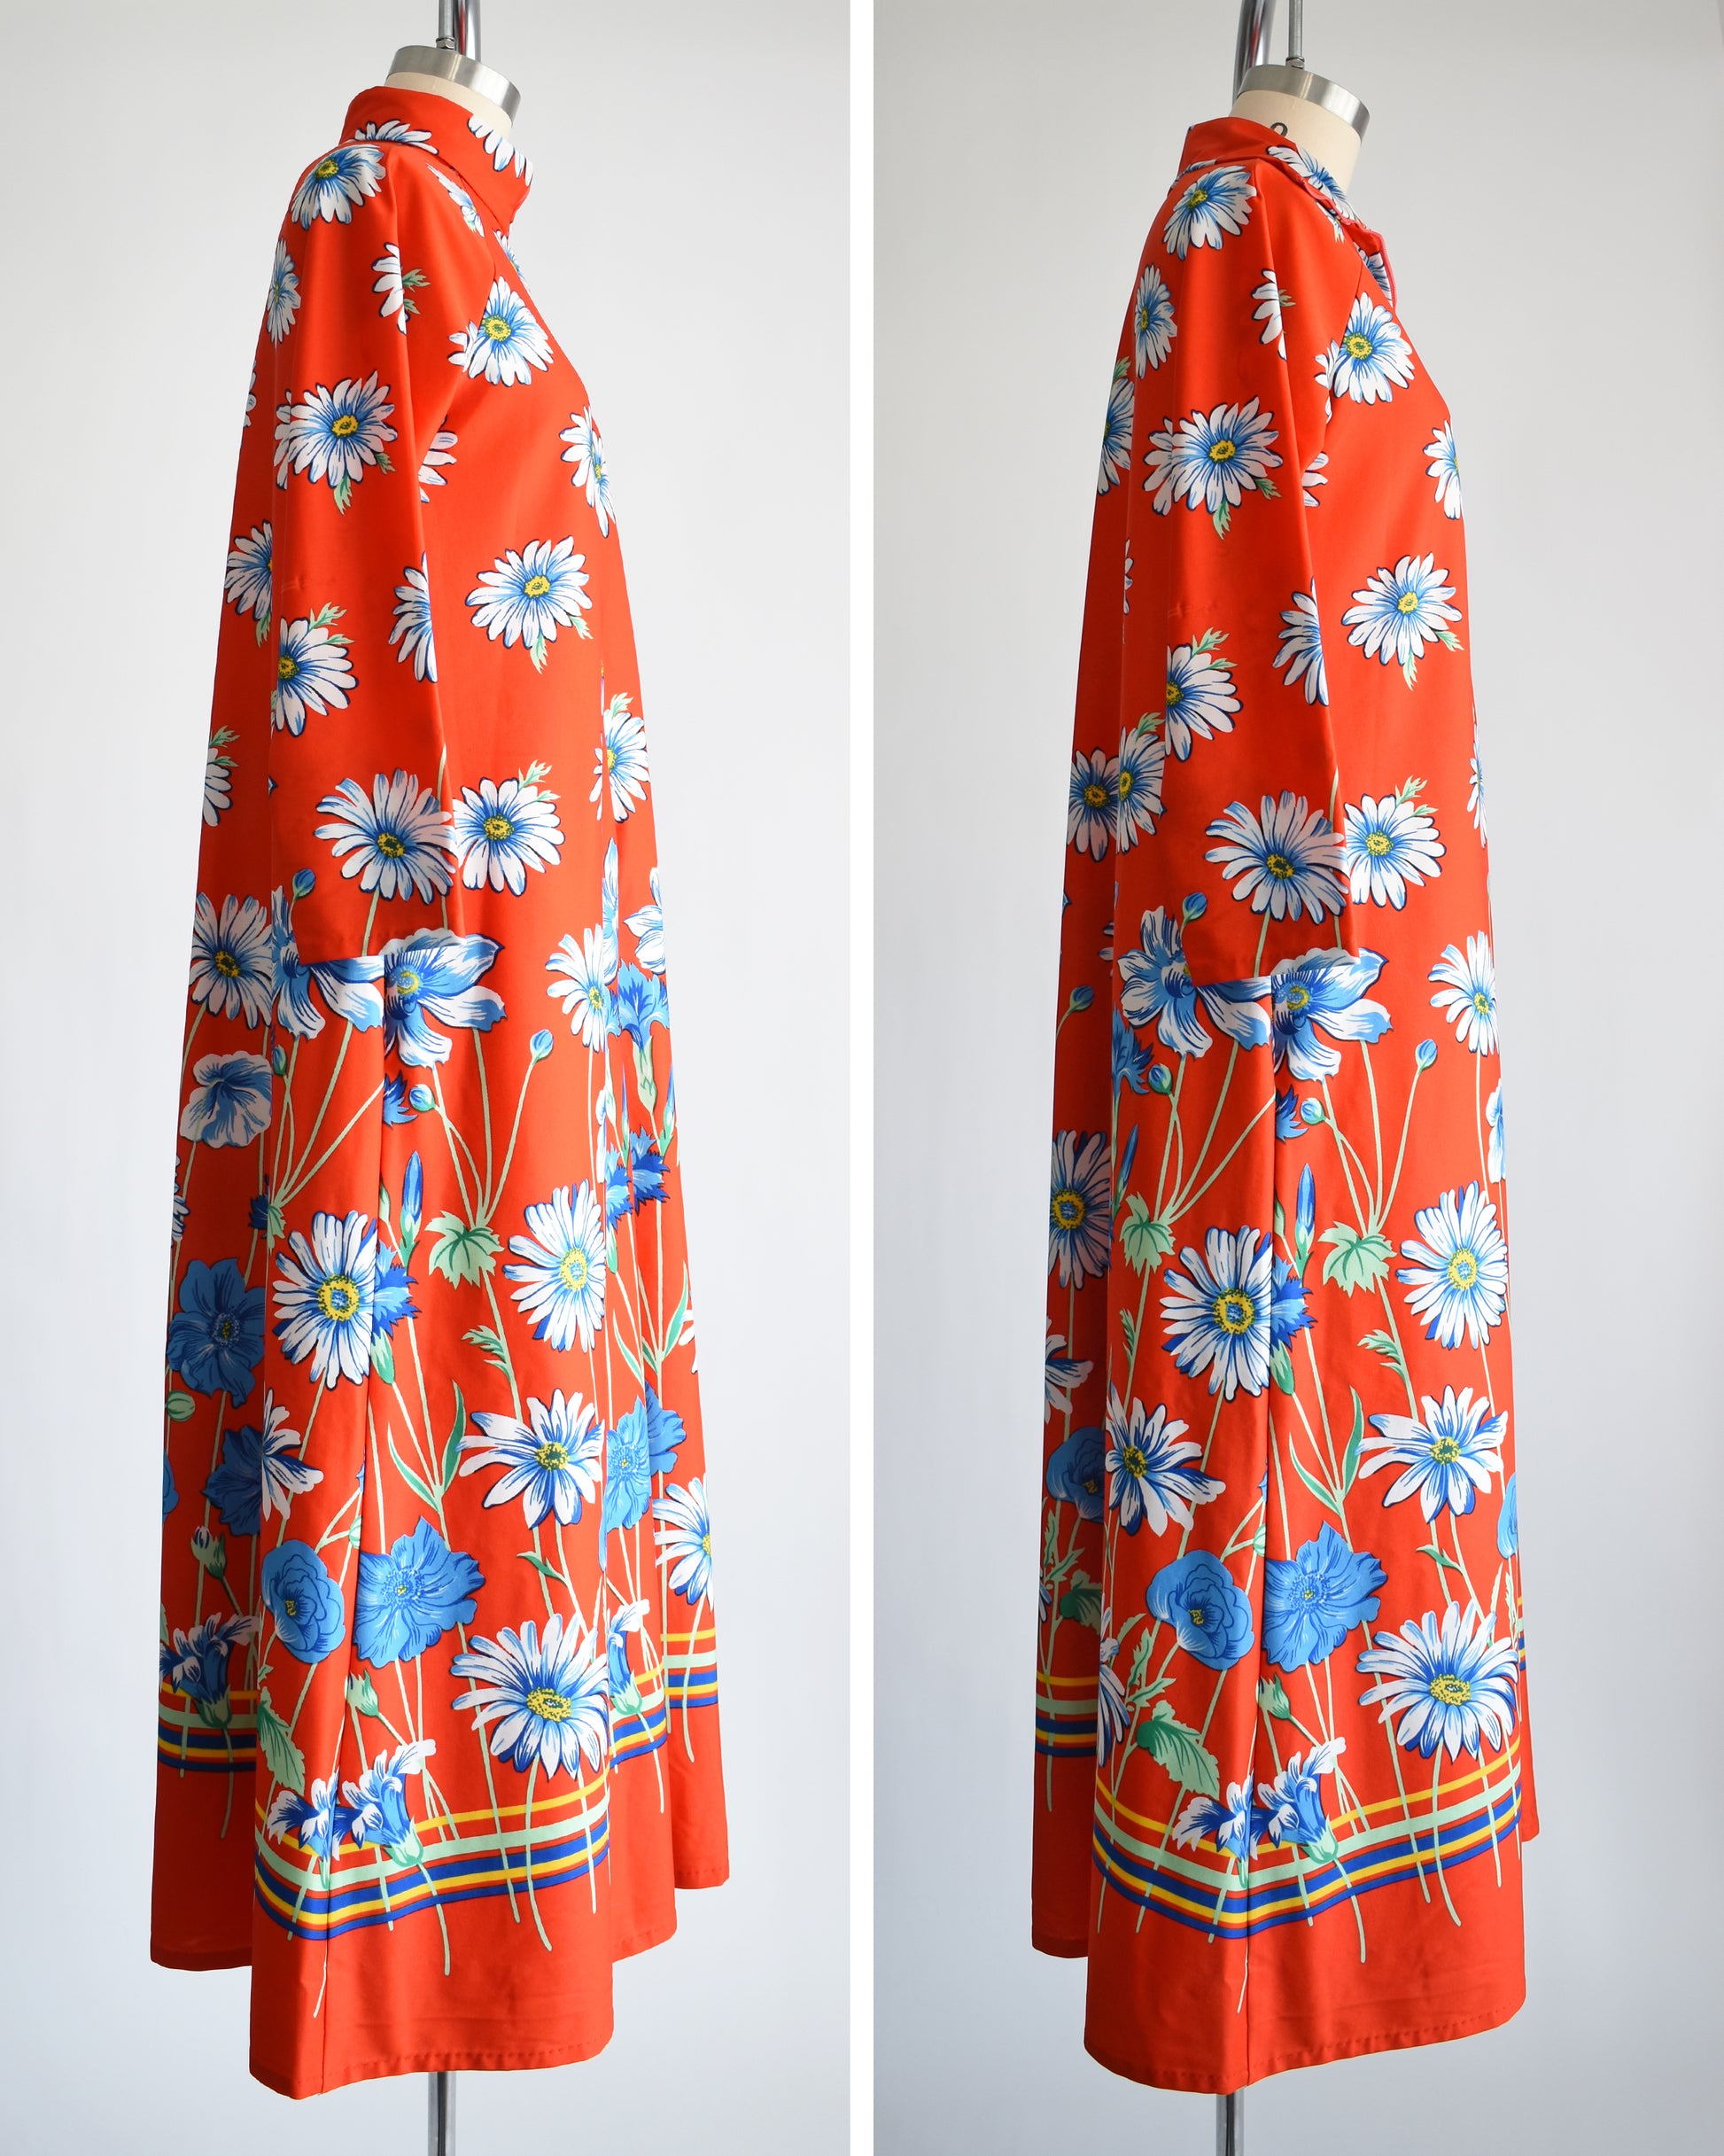 Side by side views of a vintage 1970s red floral lounge dress. The dress is zipped up all the way on the left photo